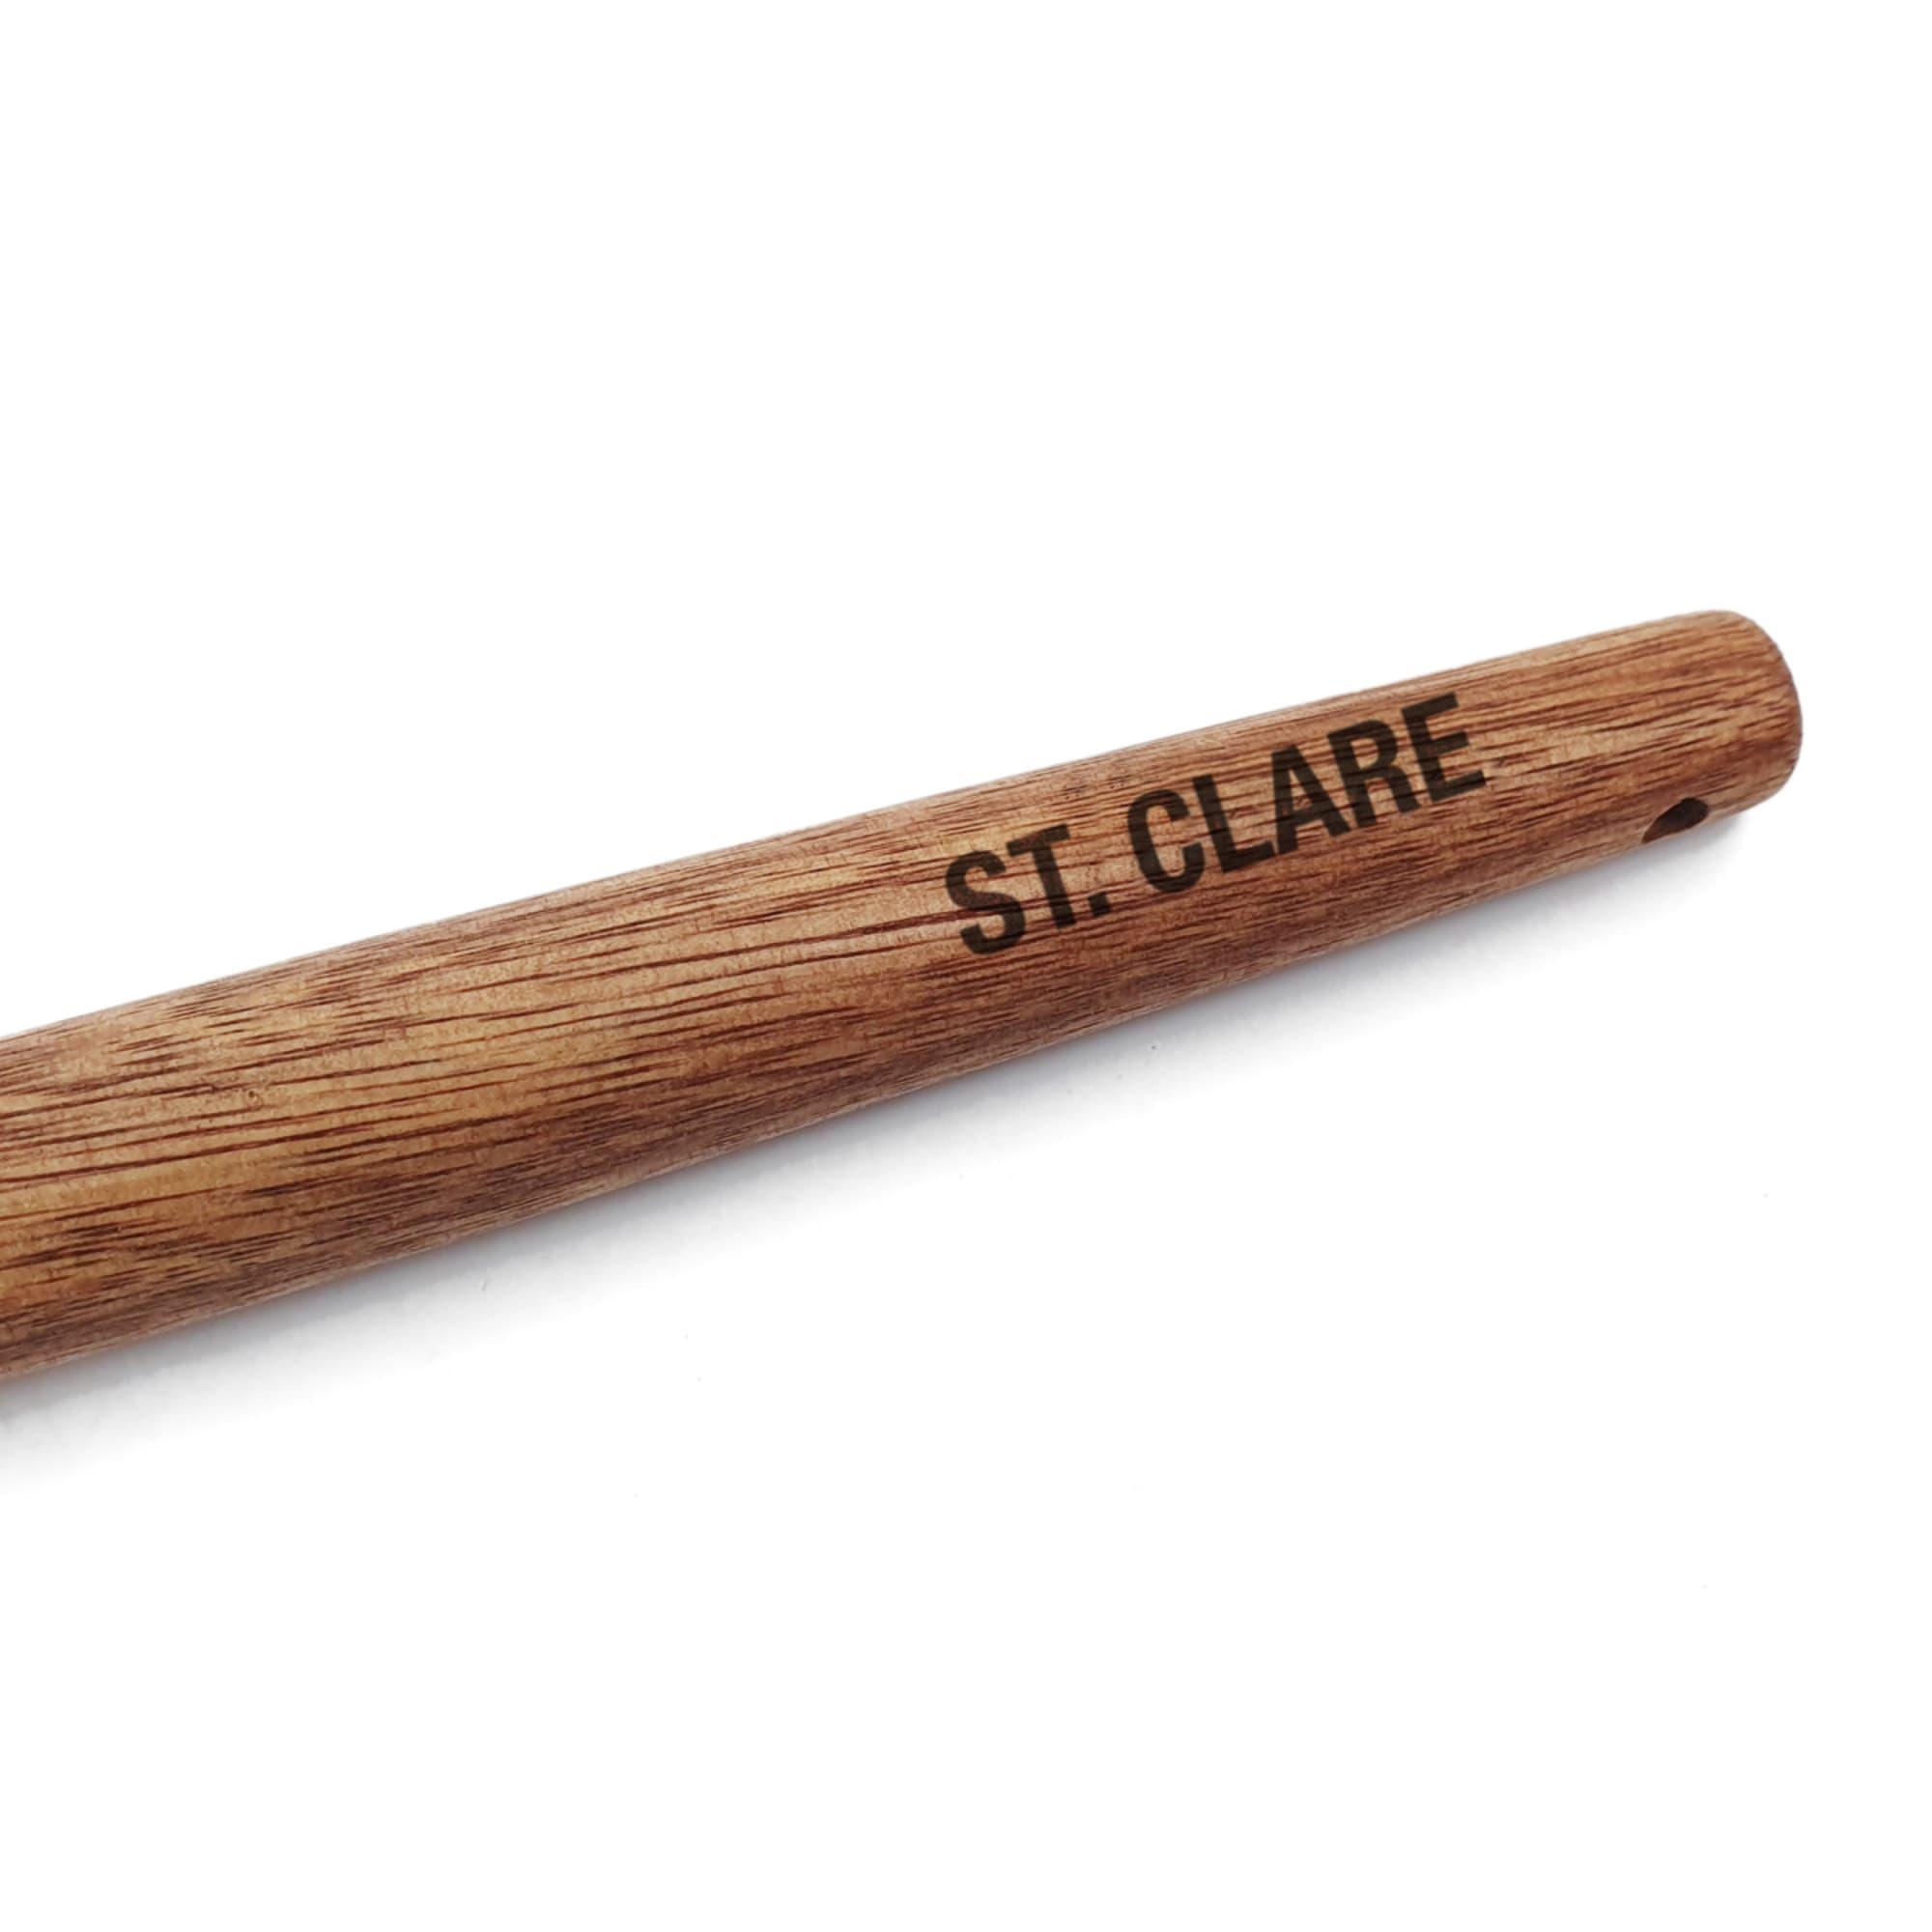 St. Clare Silicone Pastry Brush with Acacia Handle Black Image 2